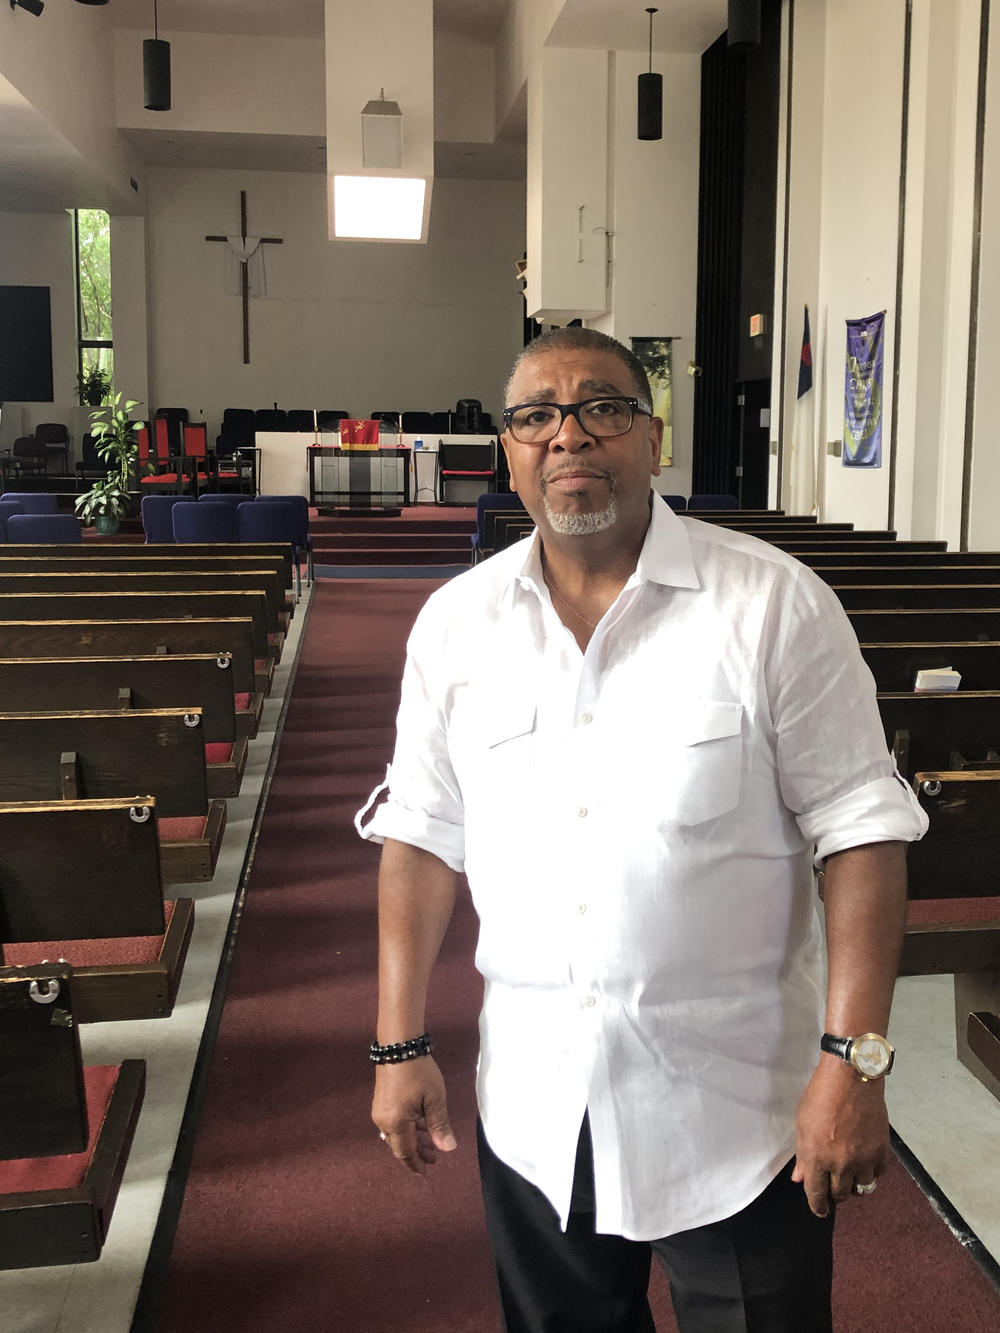 Pastor Brian Herron, of Zion Baptist Church in North Minneapolis, says people in the neighborhood want a transformed public safety system — but that includes having enough police.